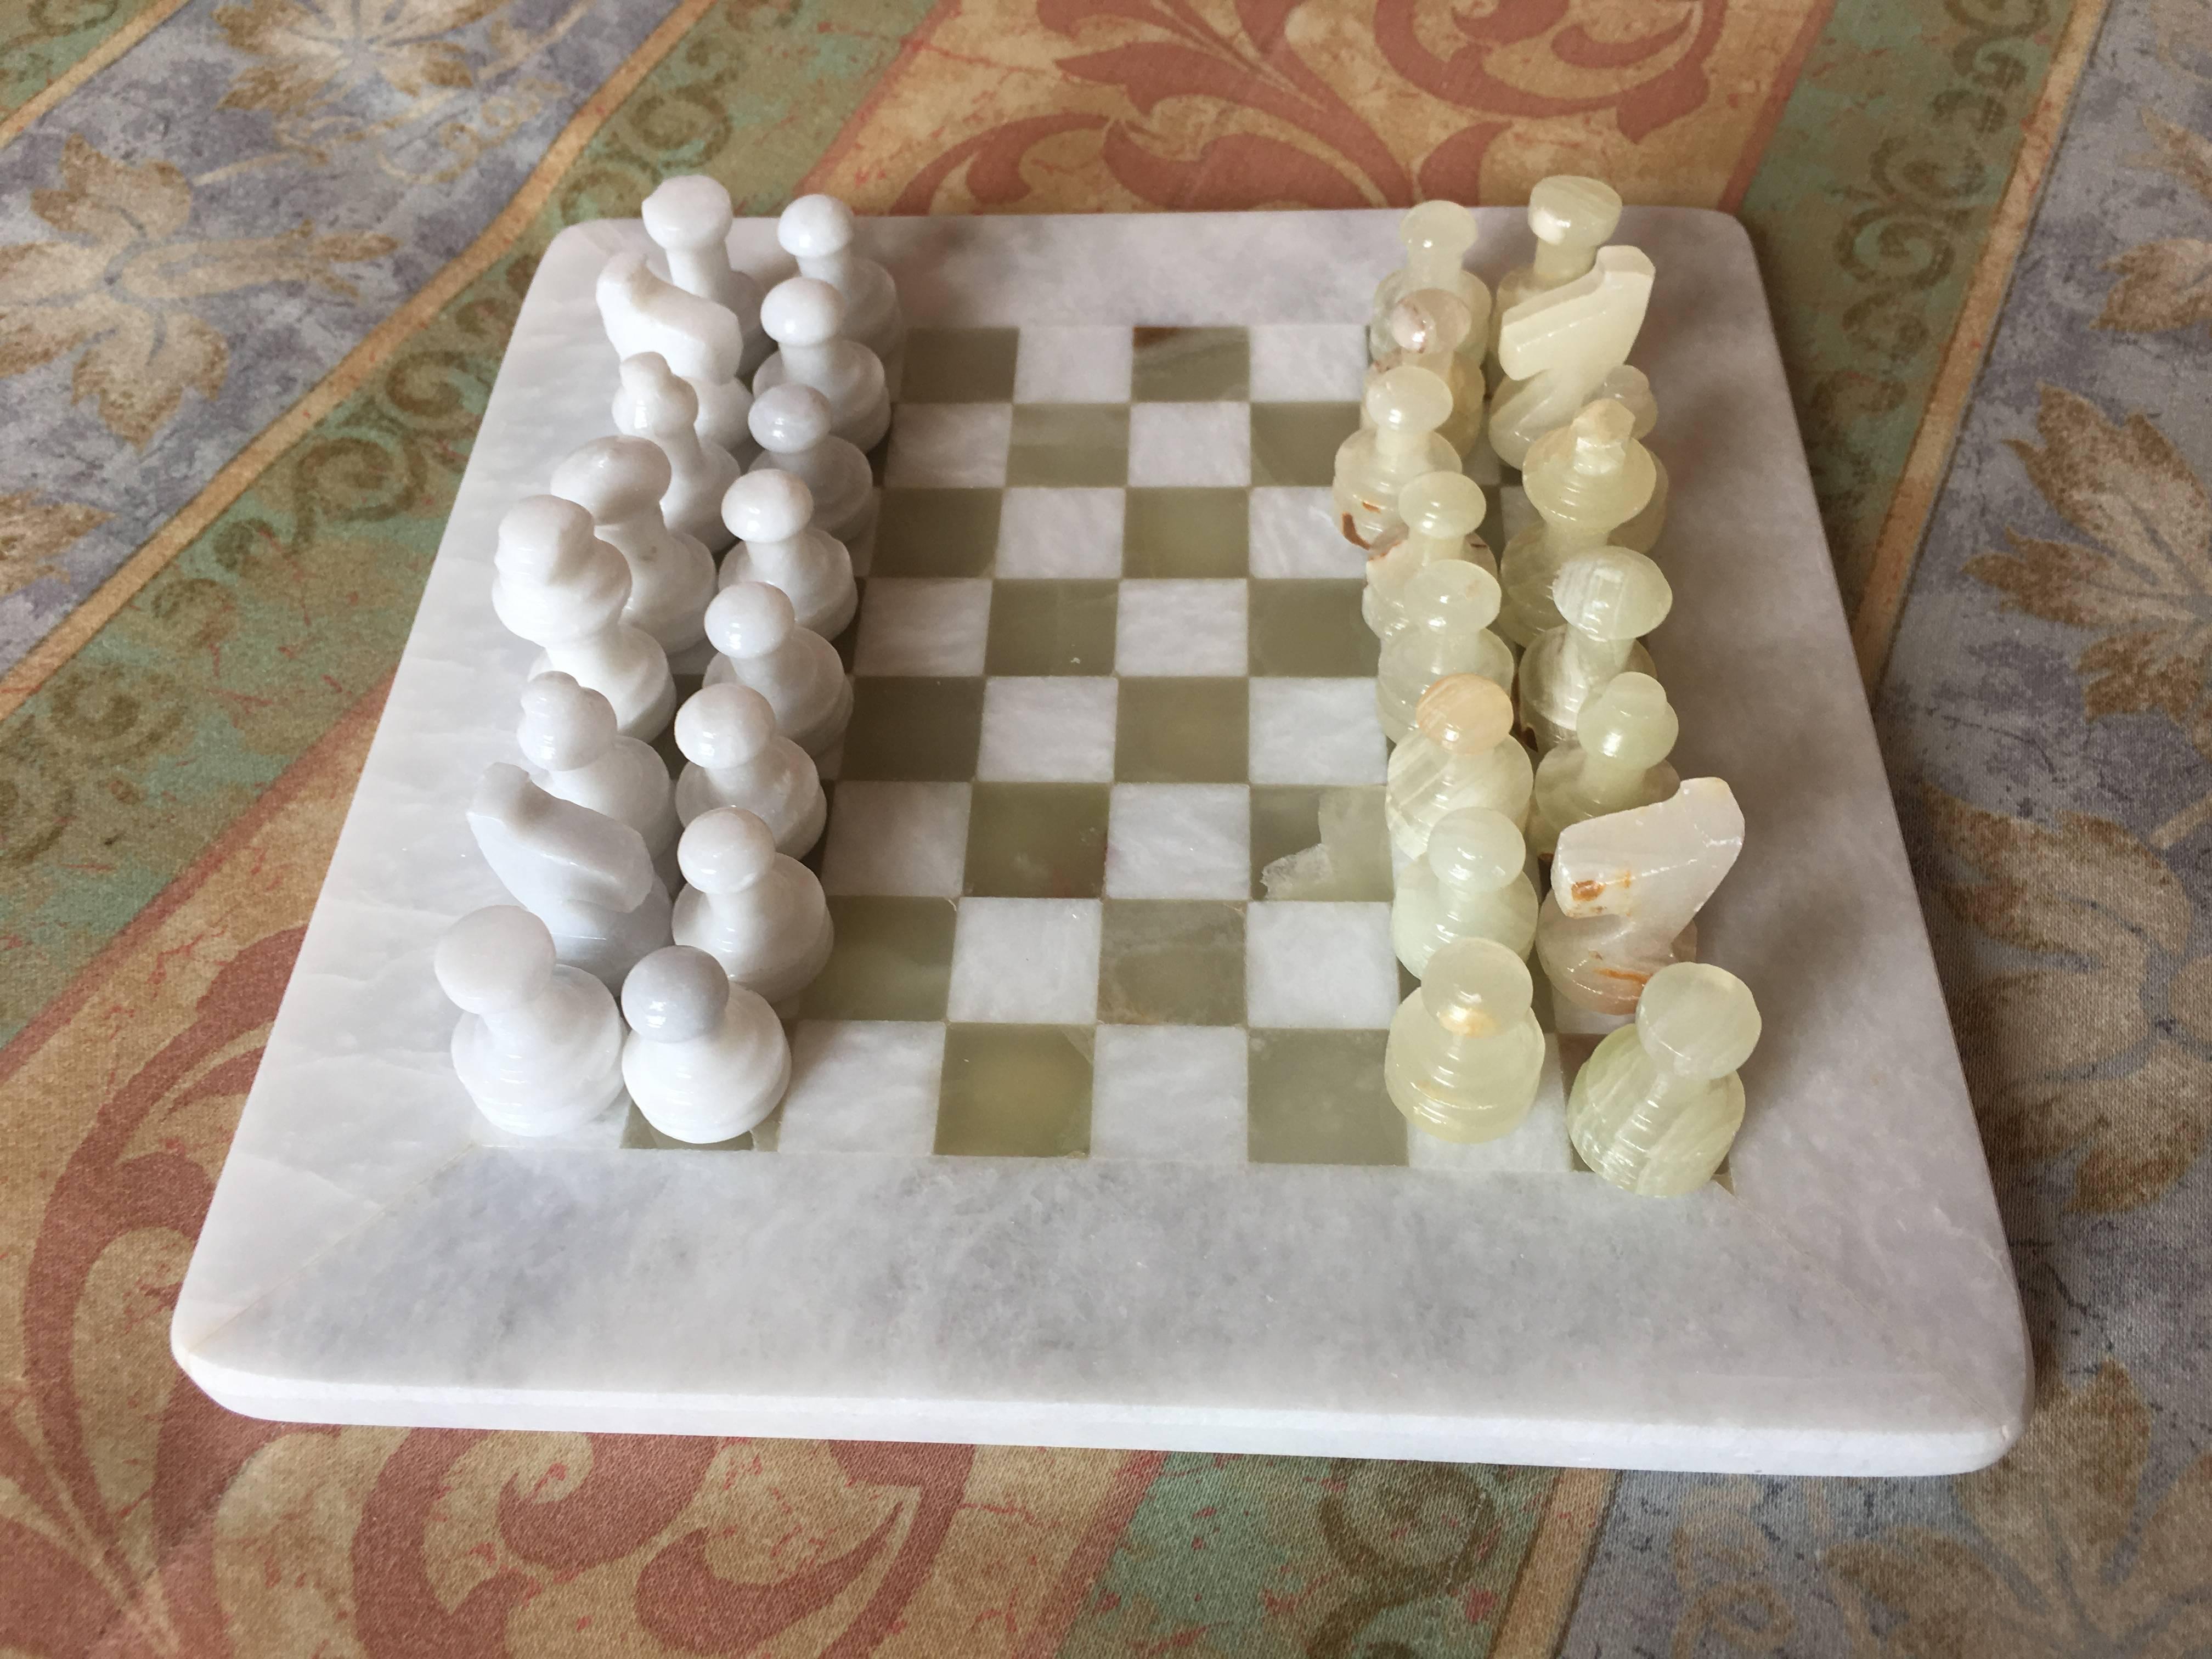 Modern Green, White Onyx Marble Hand-Carved Chess